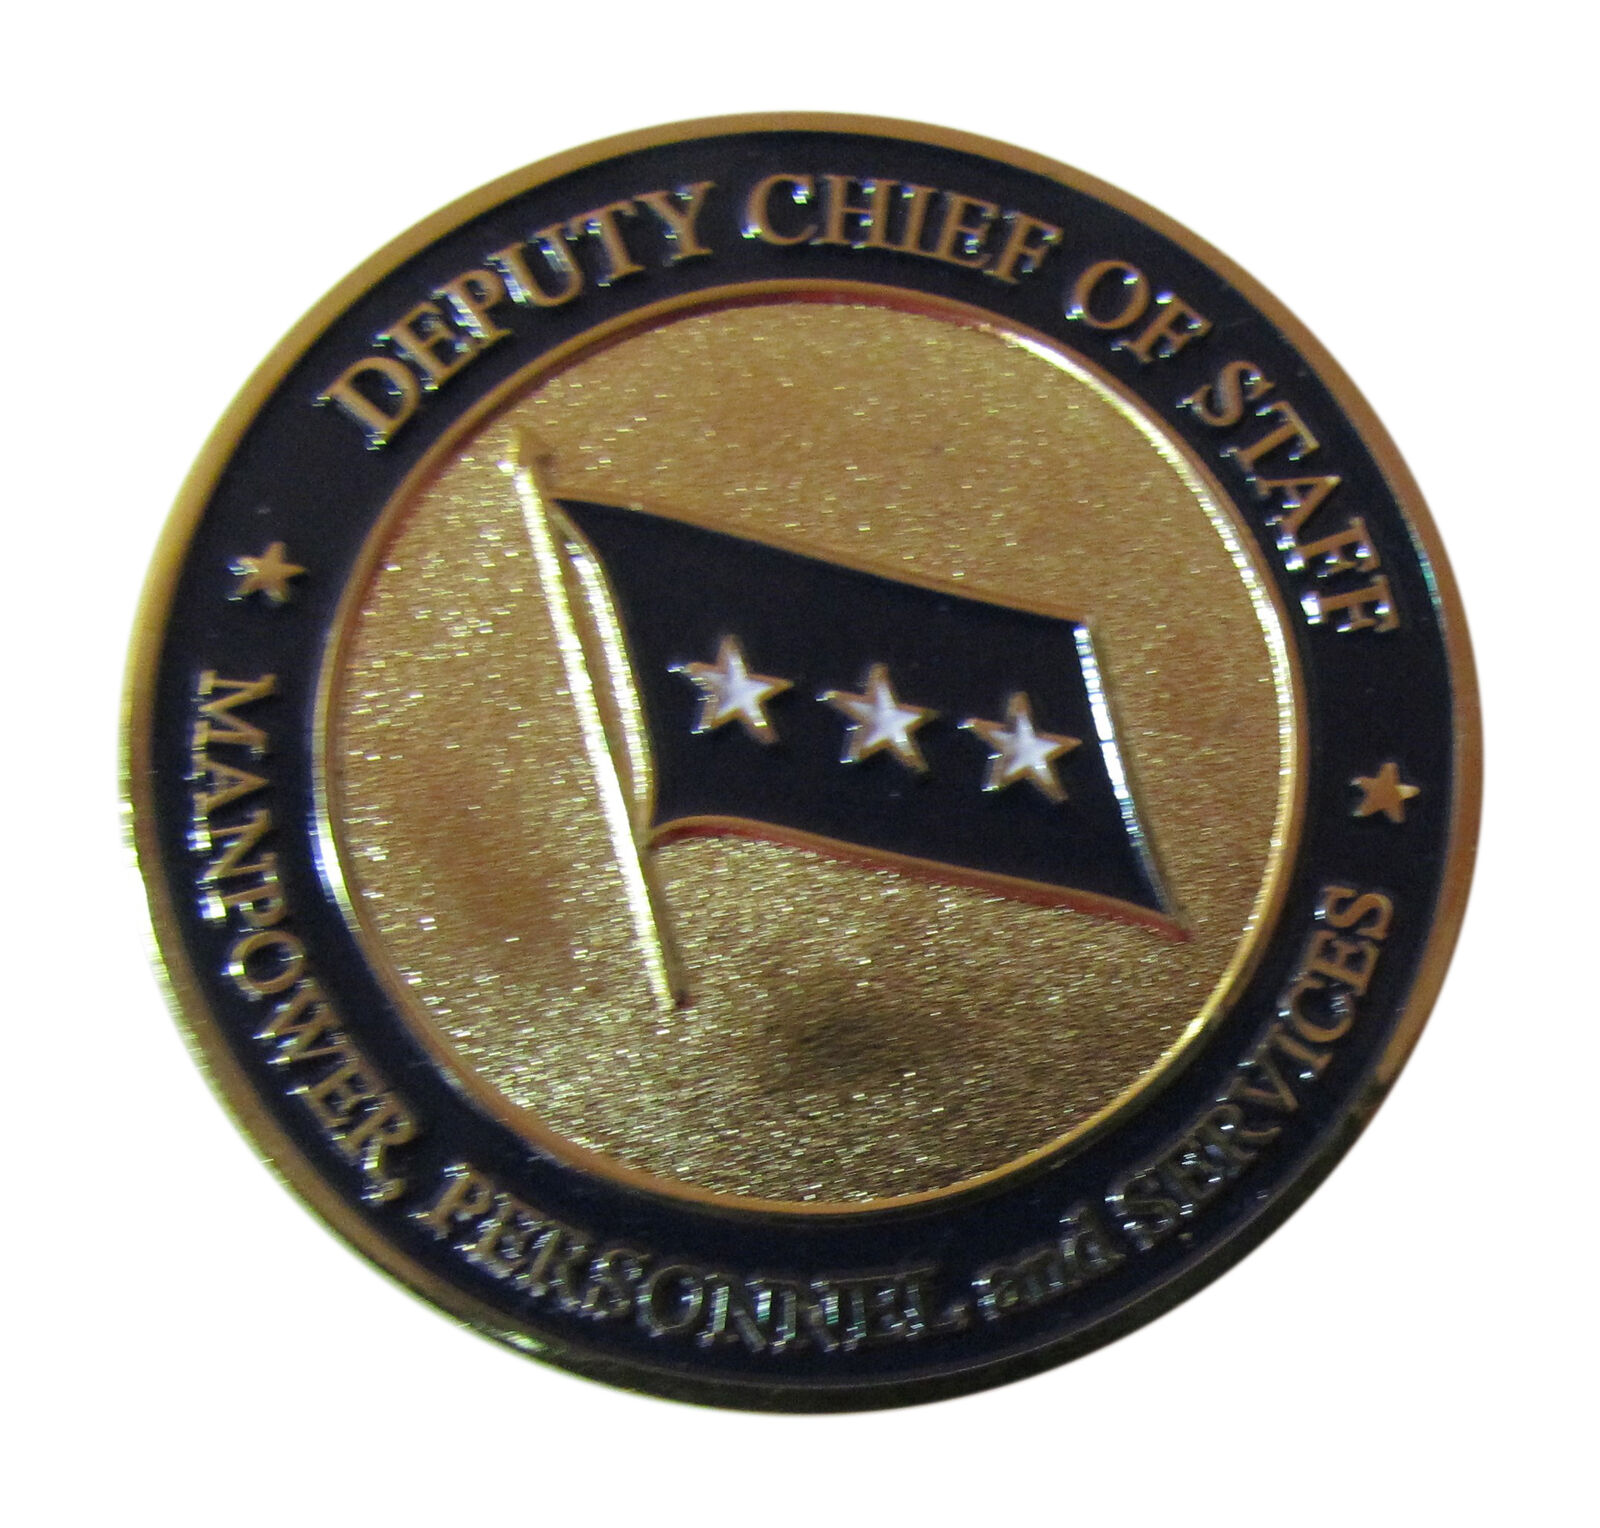 US Air Force Deputy Chief of Staff Challenge Coin